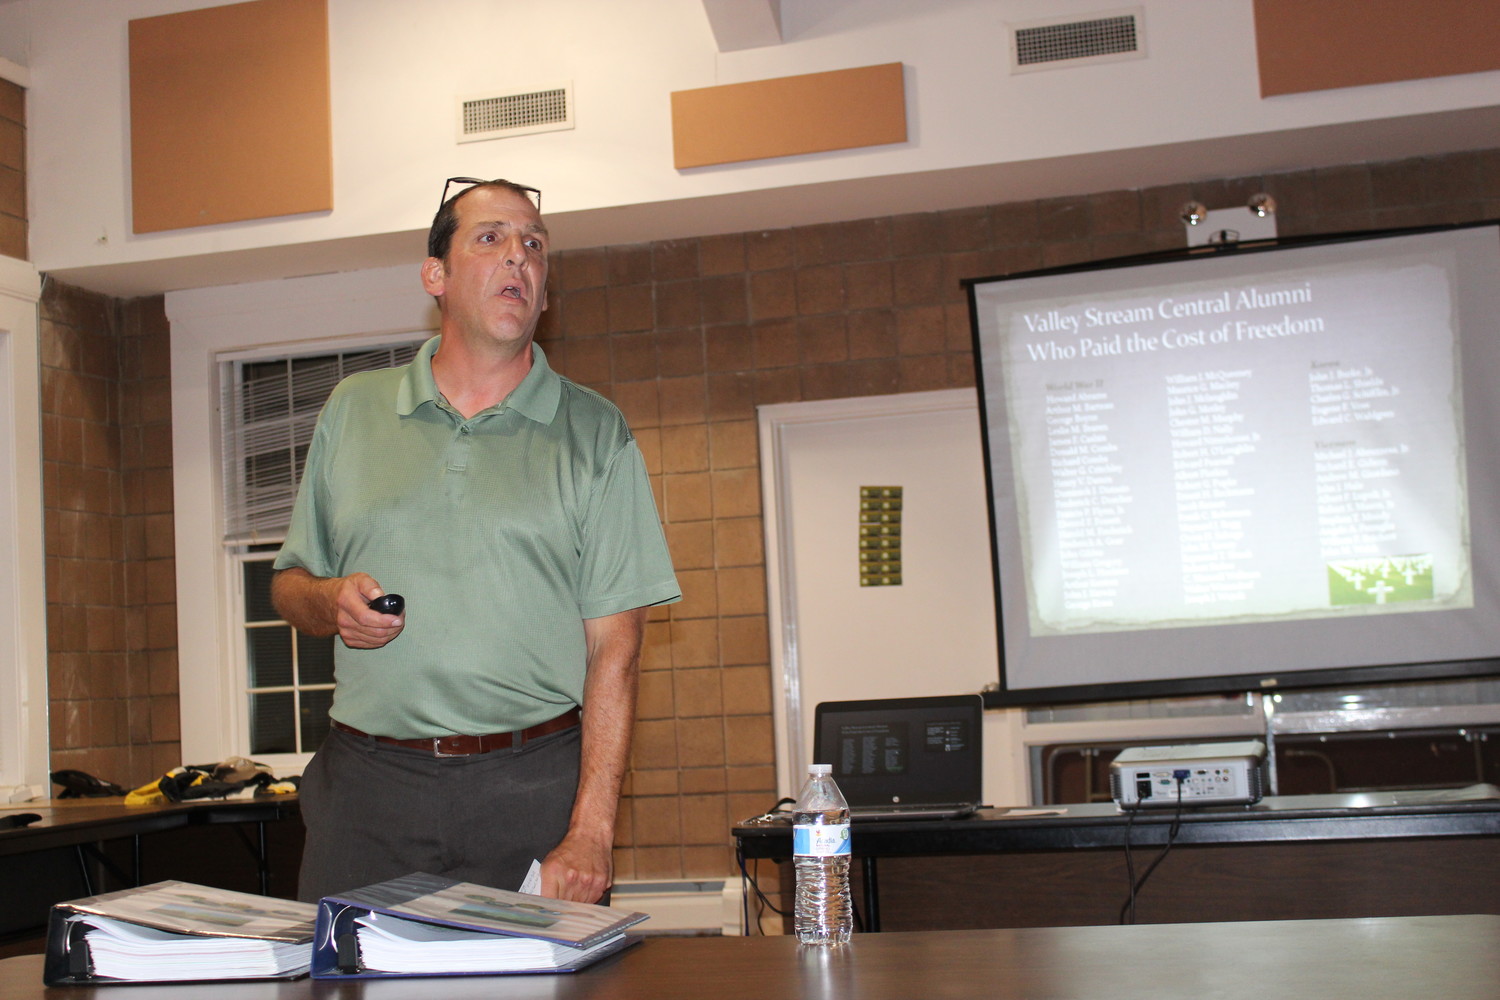 Chris Critchley, a history teacher at Central High School, gave a lecture about the 58 former students who died in World War II, the Korean War and the Vietnam War on Sept. 27 at Firemen’s Field.